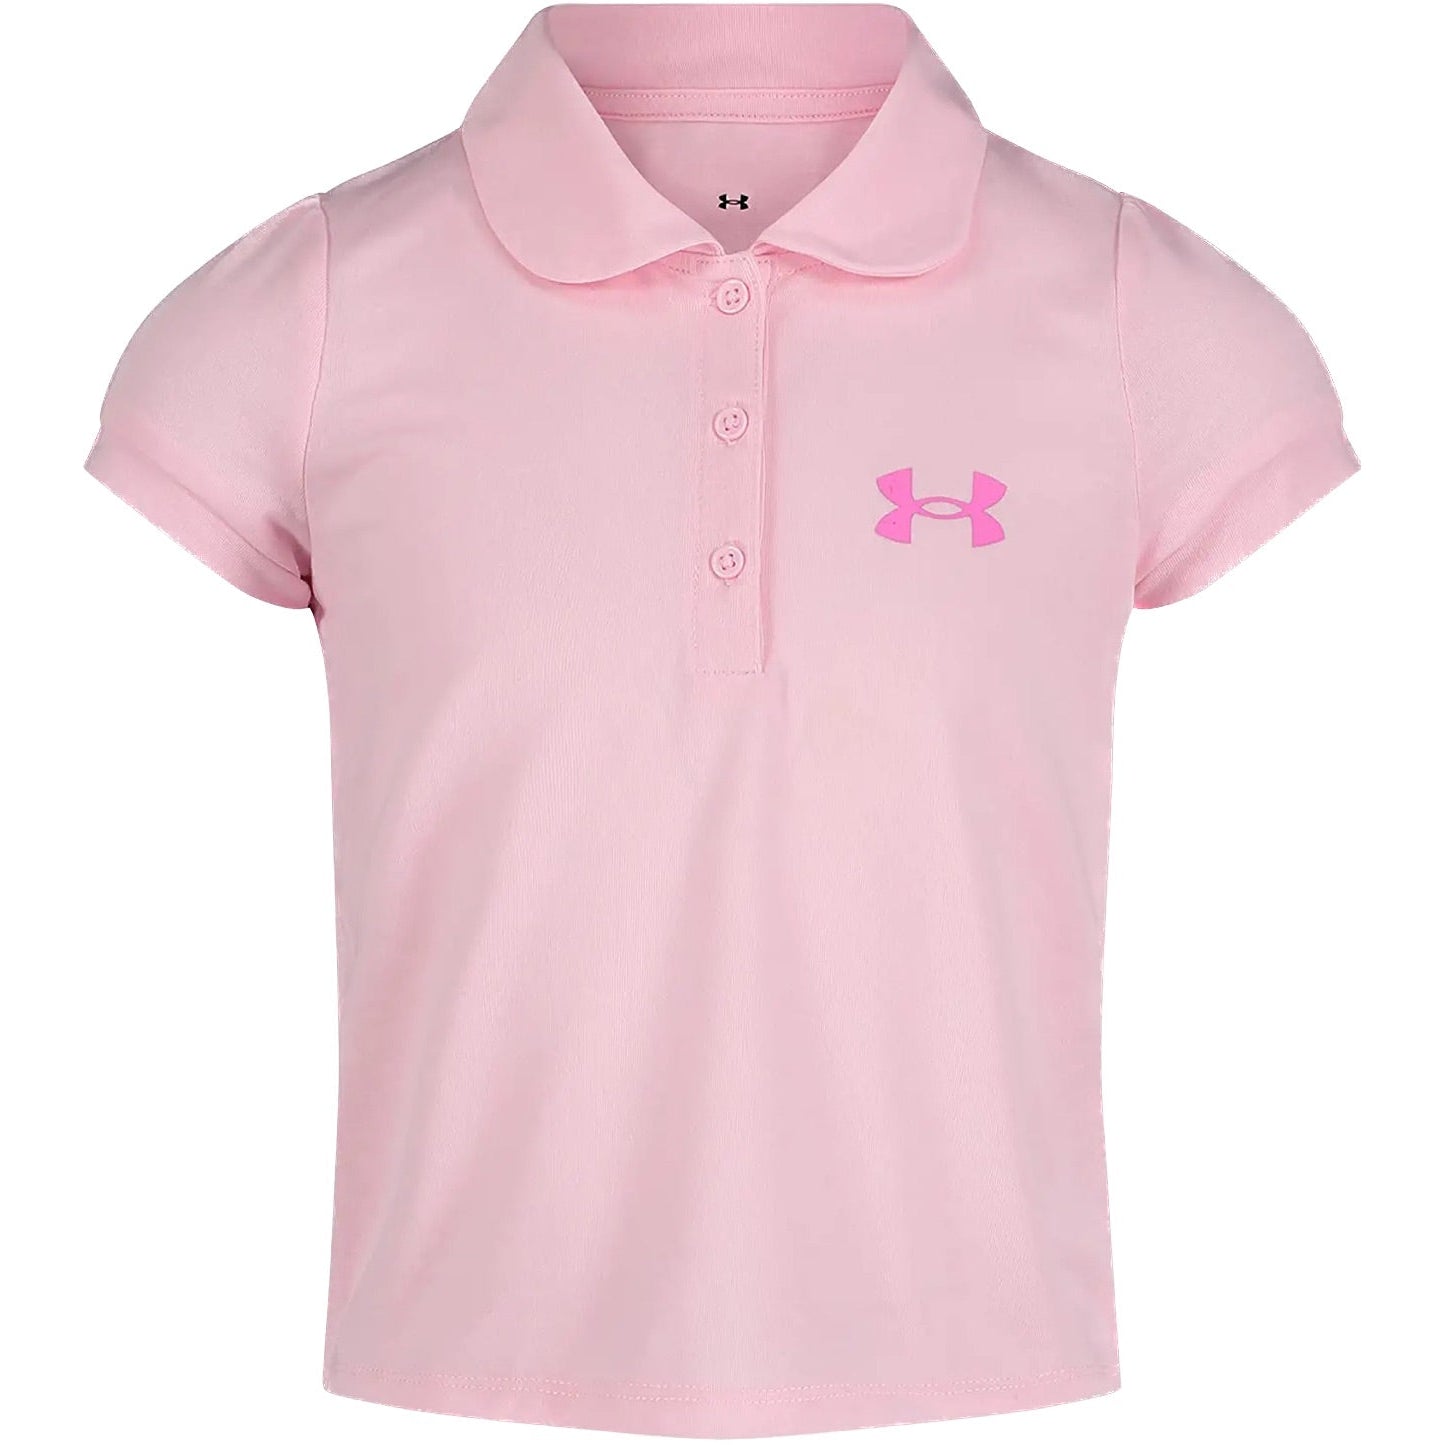 Under Armour Girls UA Solid Polo, Toddler